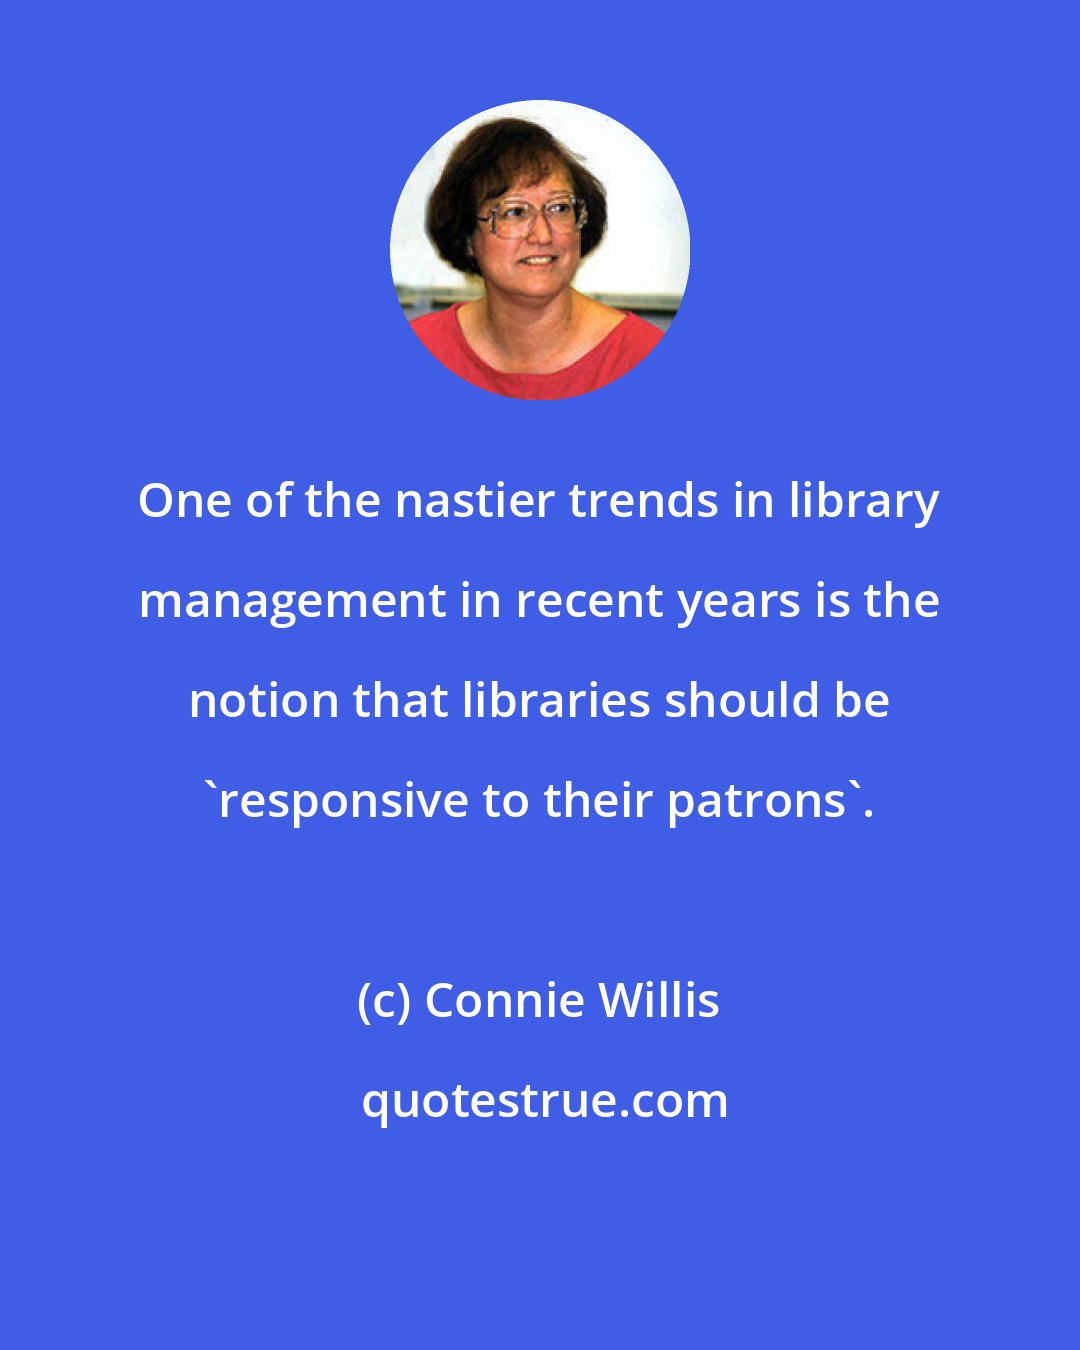 Connie Willis: One of the nastier trends in library management in recent years is the notion that libraries should be 'responsive to their patrons'.